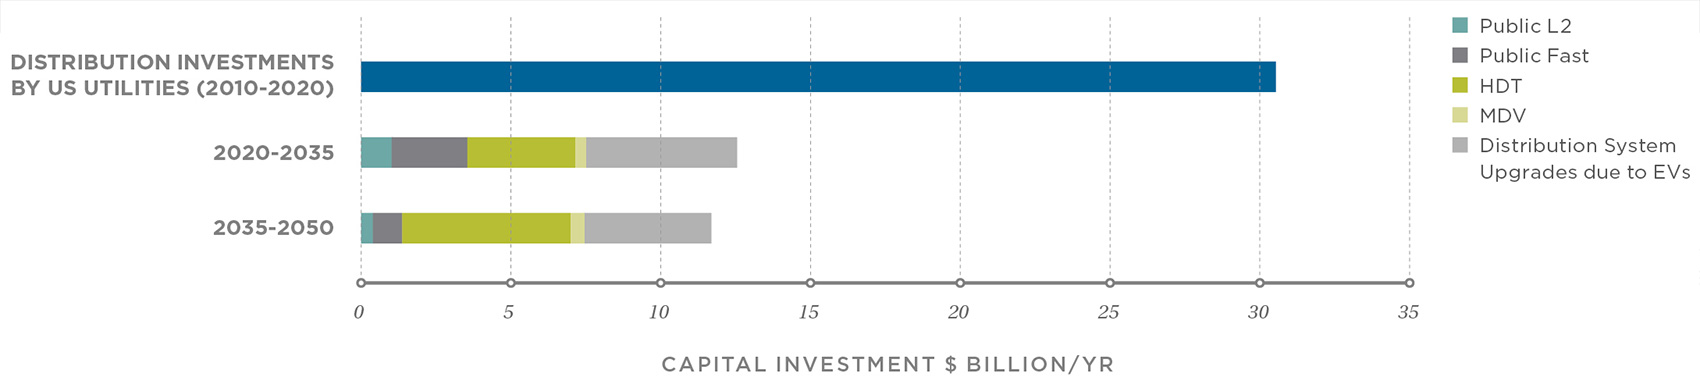 Distribution Investments by US Utilities 2010-2020, Capital Investments $ Billion/Yr